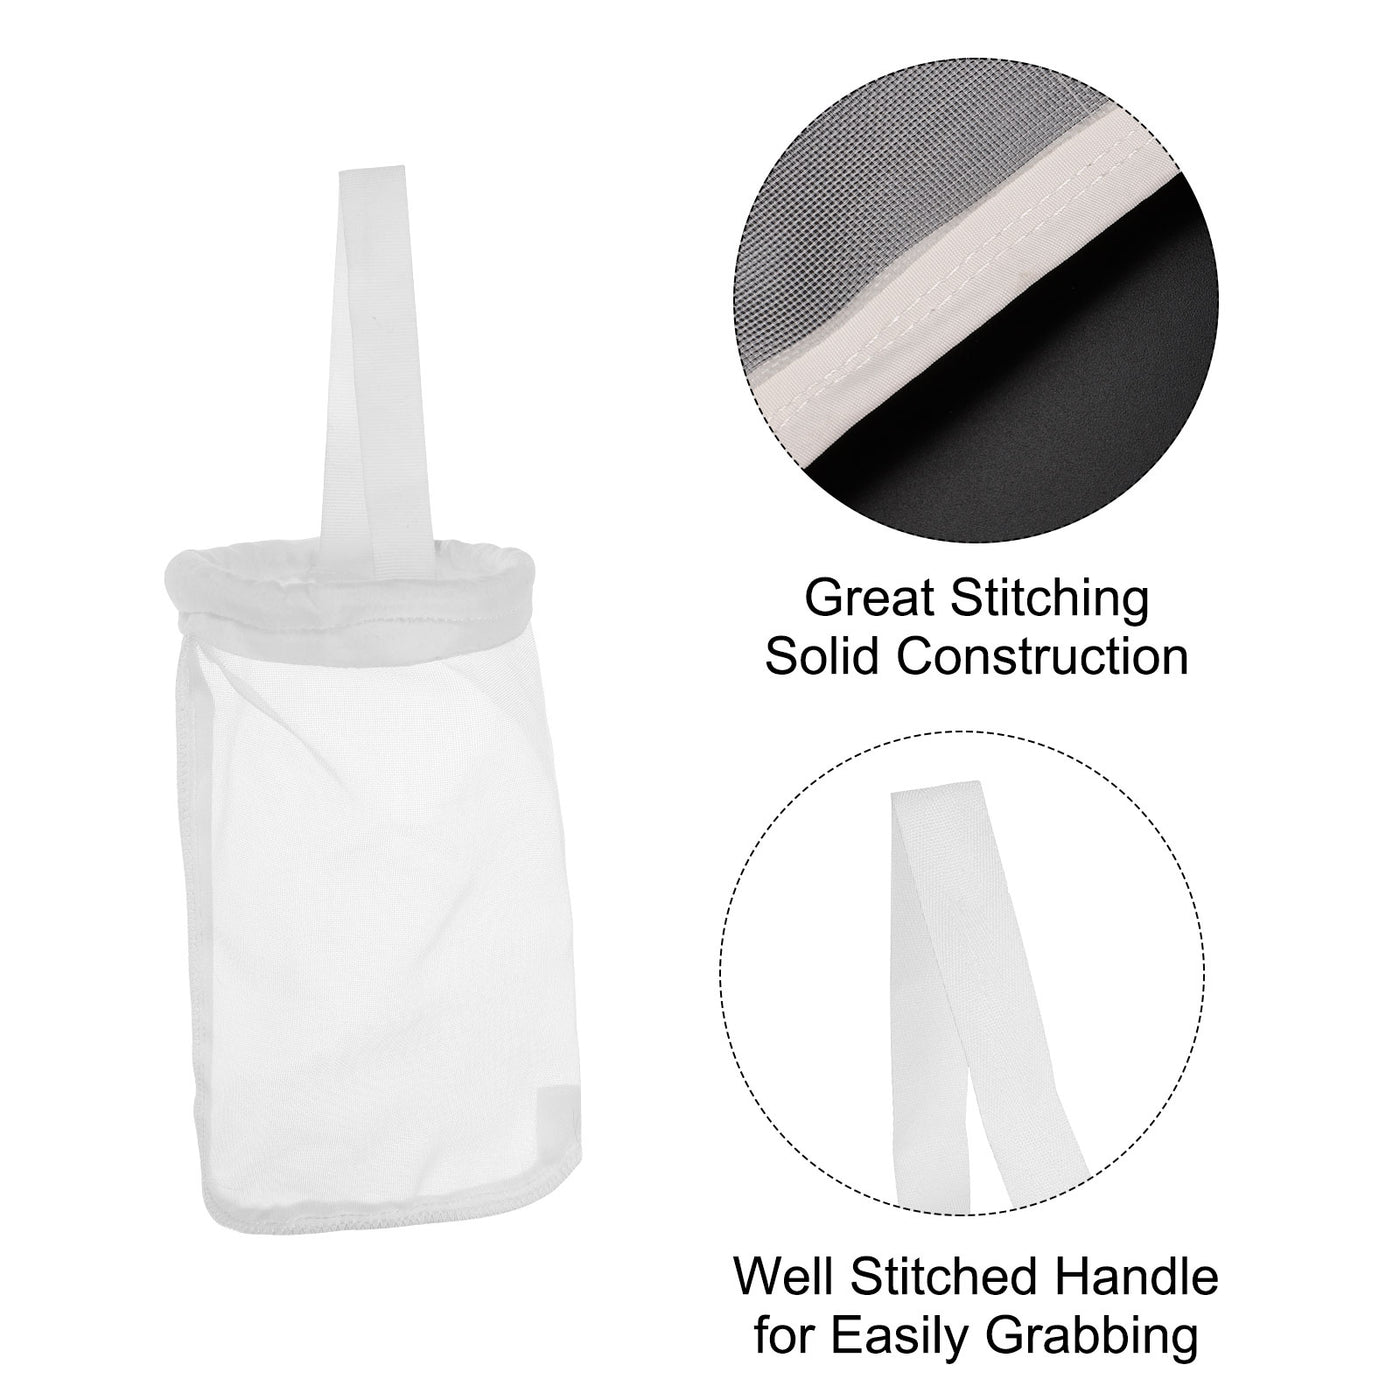 uxcell Uxcell Paint Filter Bag 40 Mesh (9.1"x4.1") Nylon Strainer for Filtering Paint